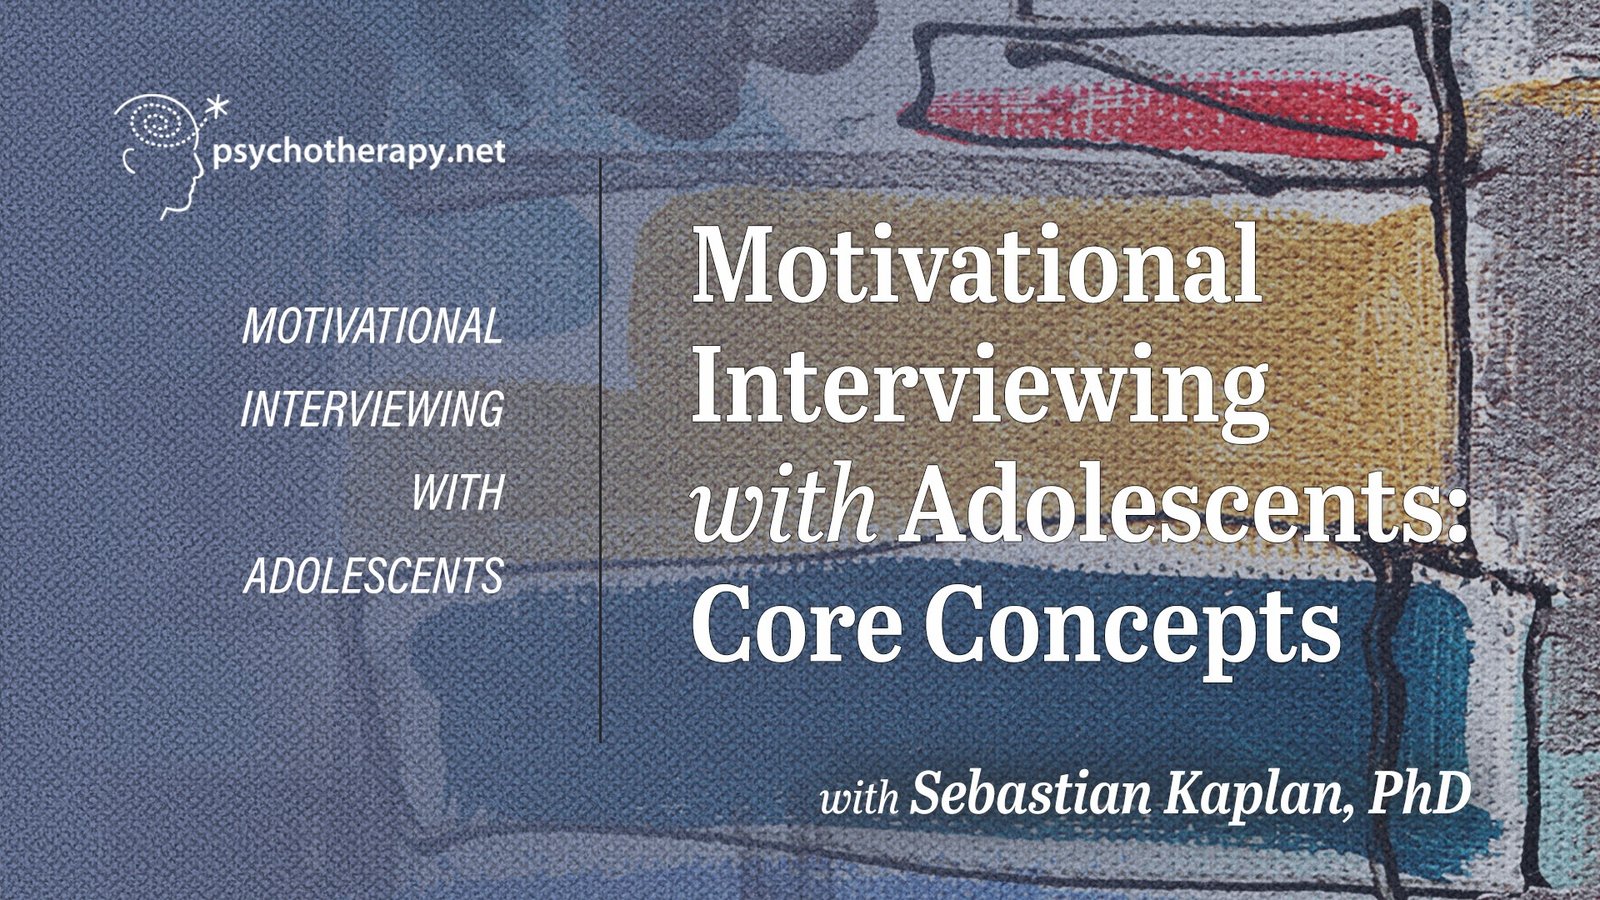 Motivational Interviewing with Adolescents: Core Concepts